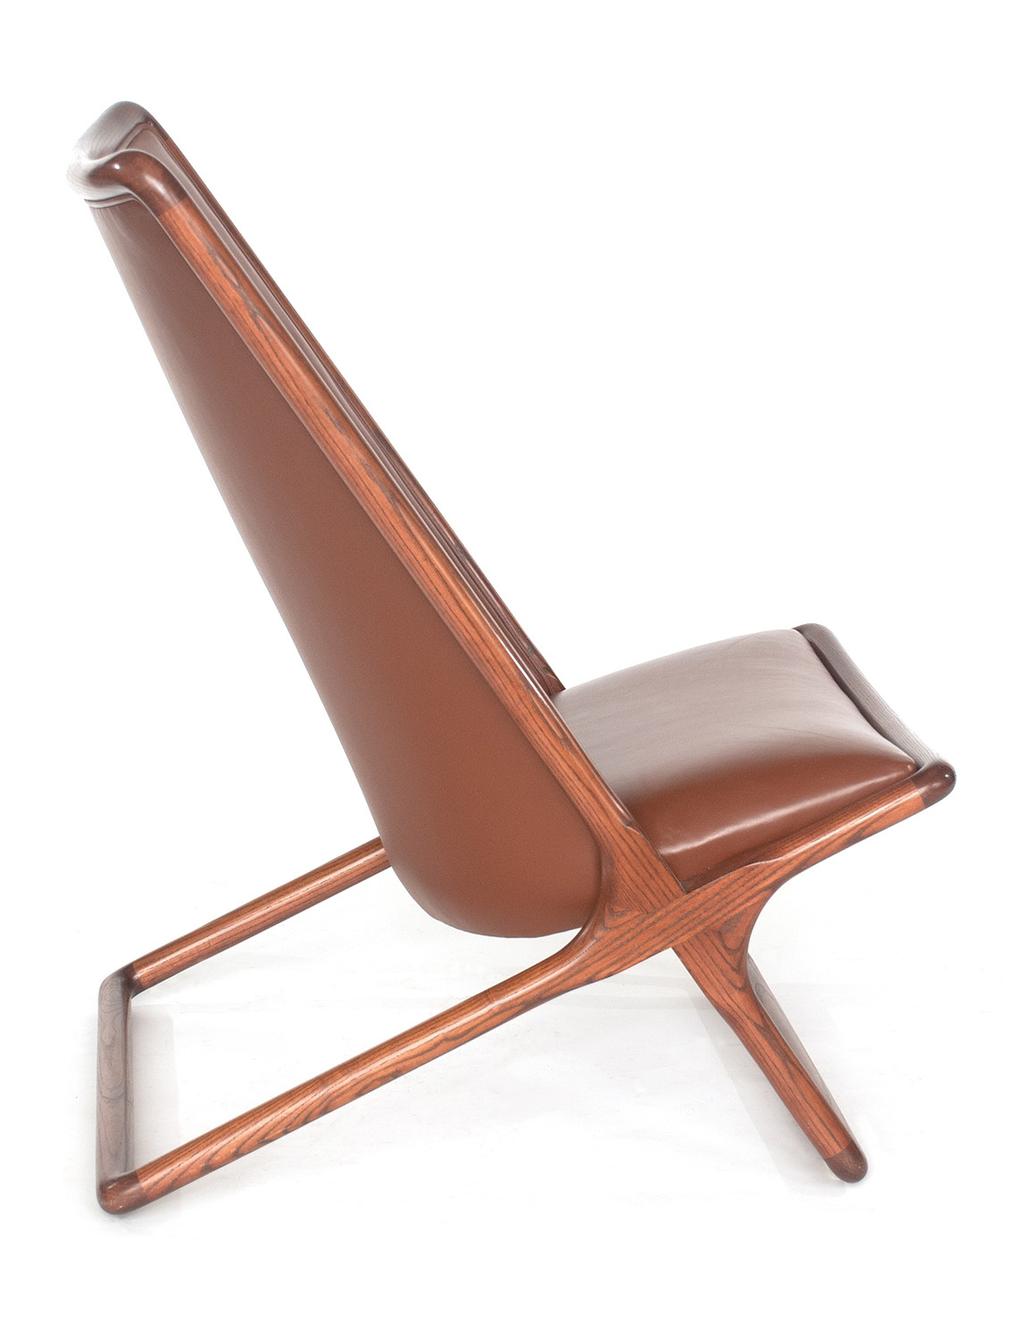 Vintage Scissor Chair, 1970 s DESIGN: (1917-2003) "Whether making sculpture, designing space, or designing a chair; it is